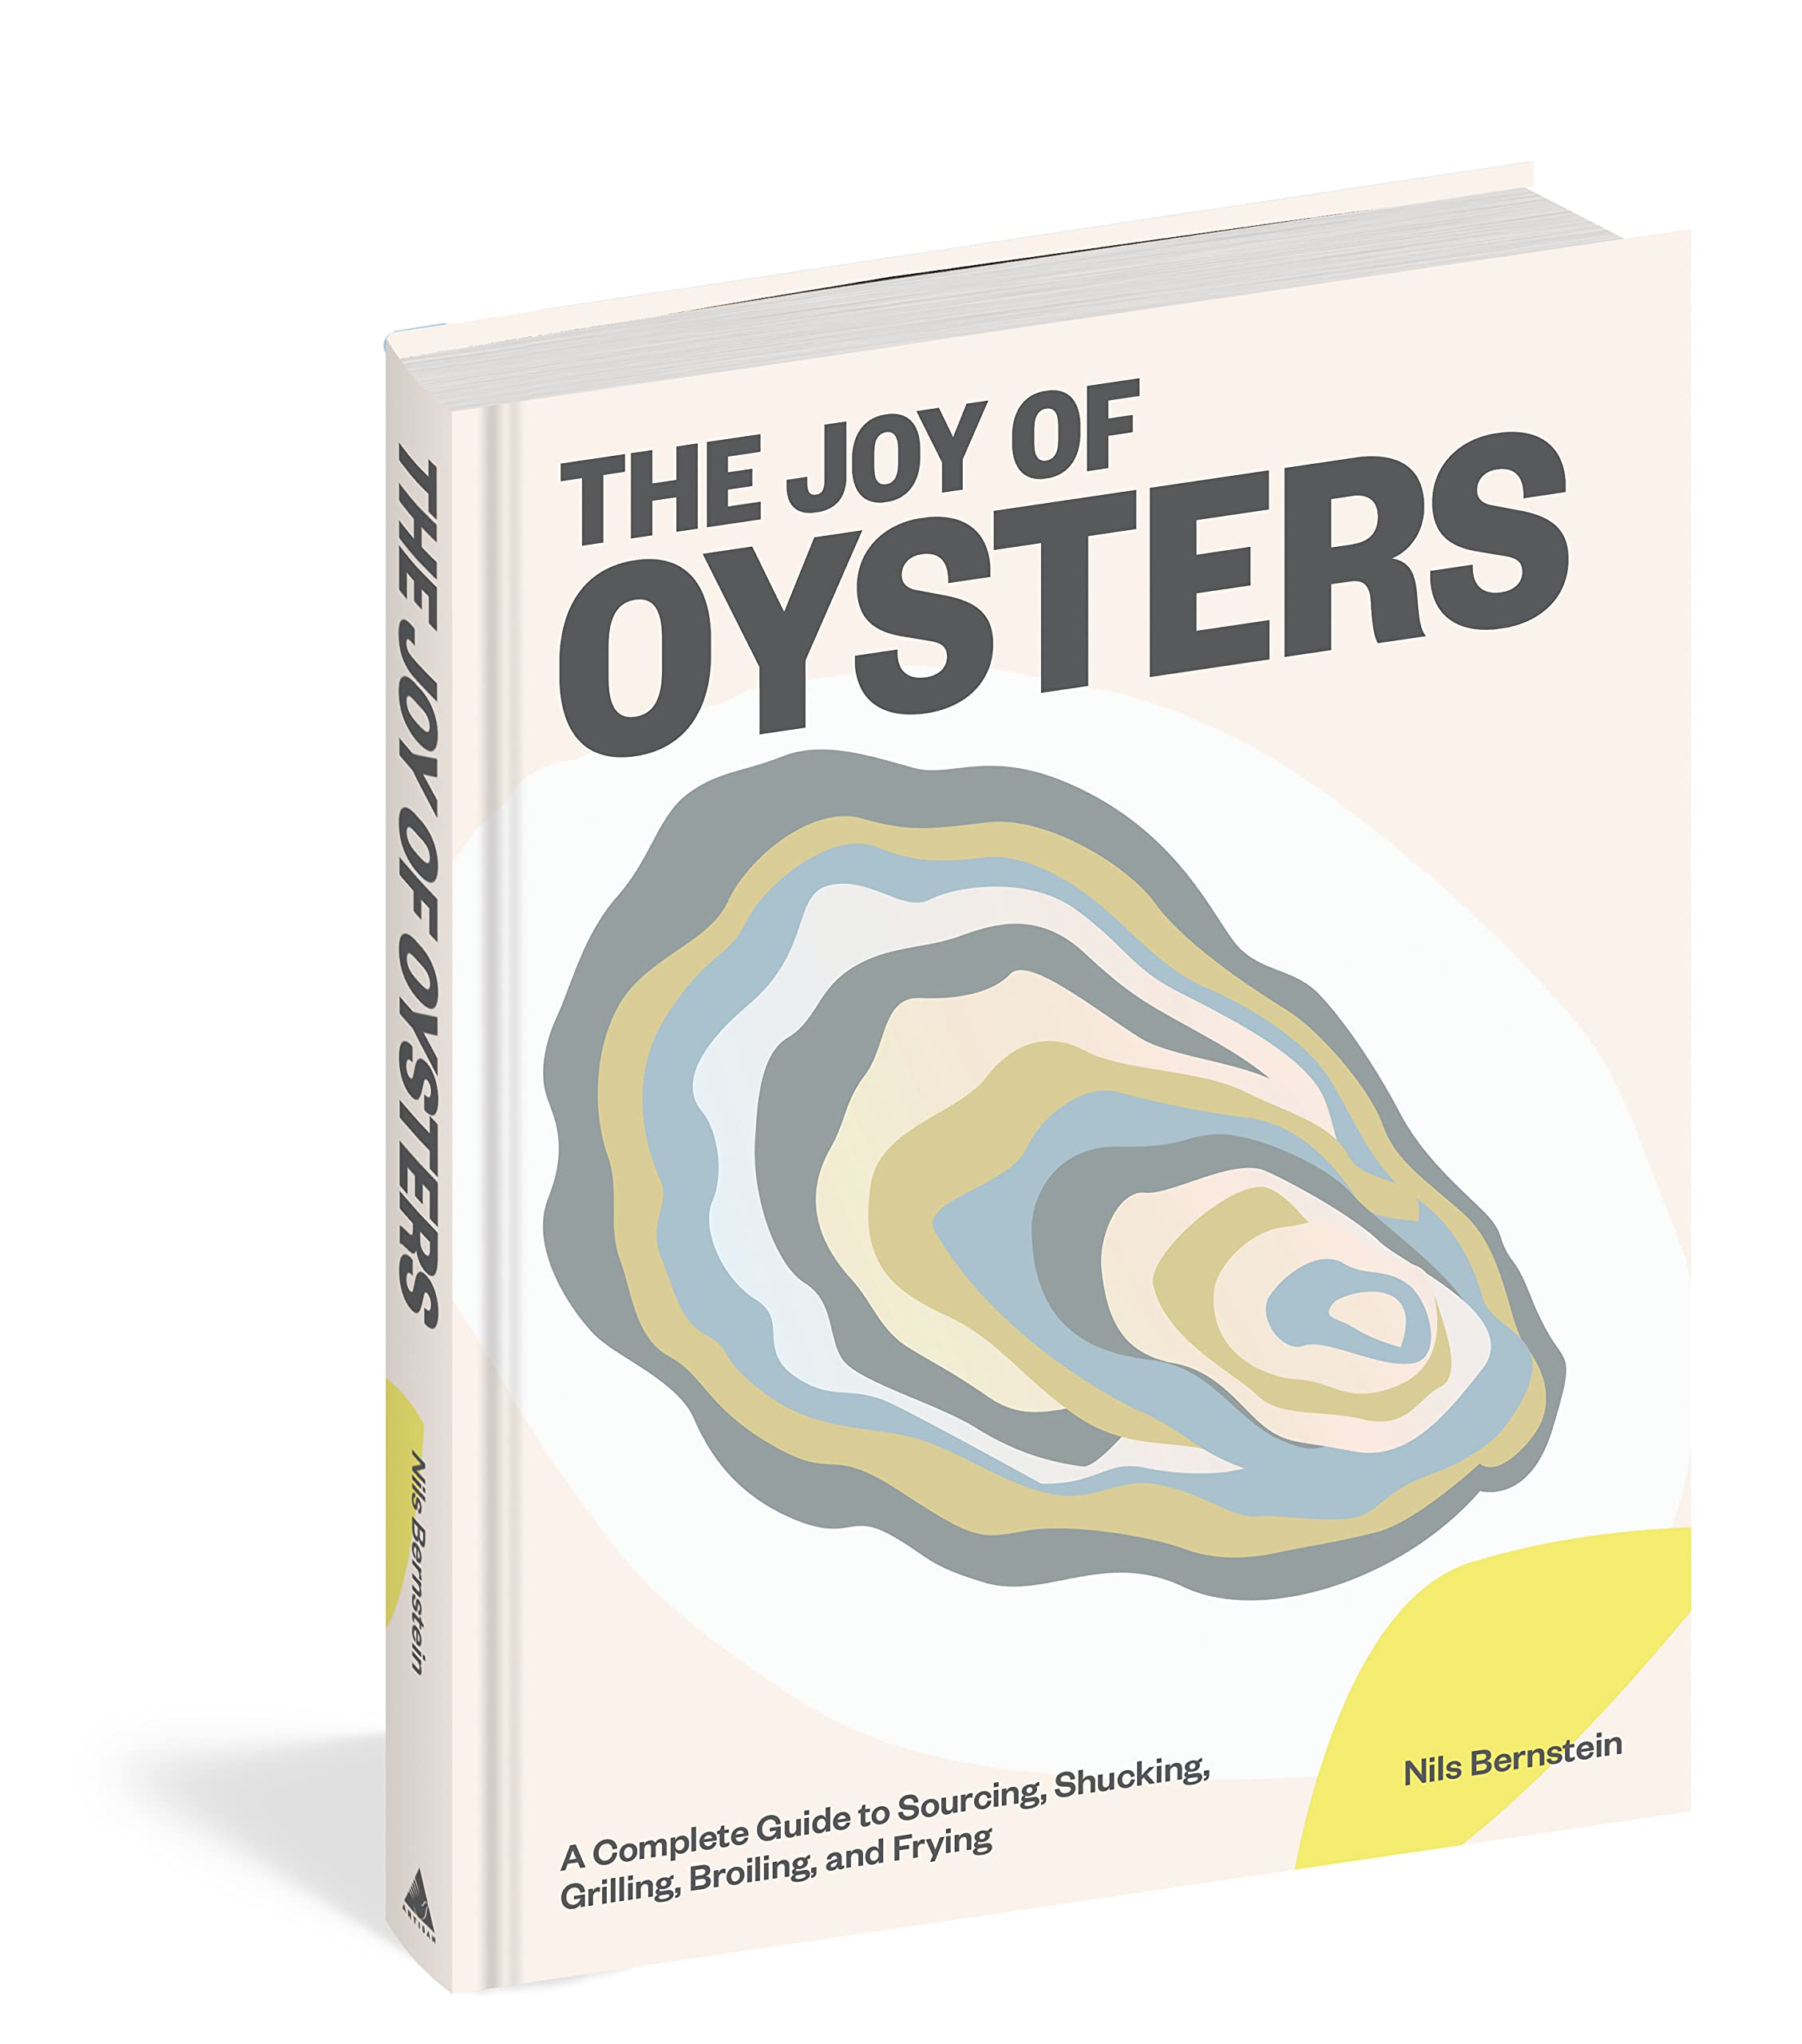 The Joy of Oysters: A Complete Guide to Sourcing, Shucking, Grilling, Broiling, and Frying (Nils Bernstein) *Signed*